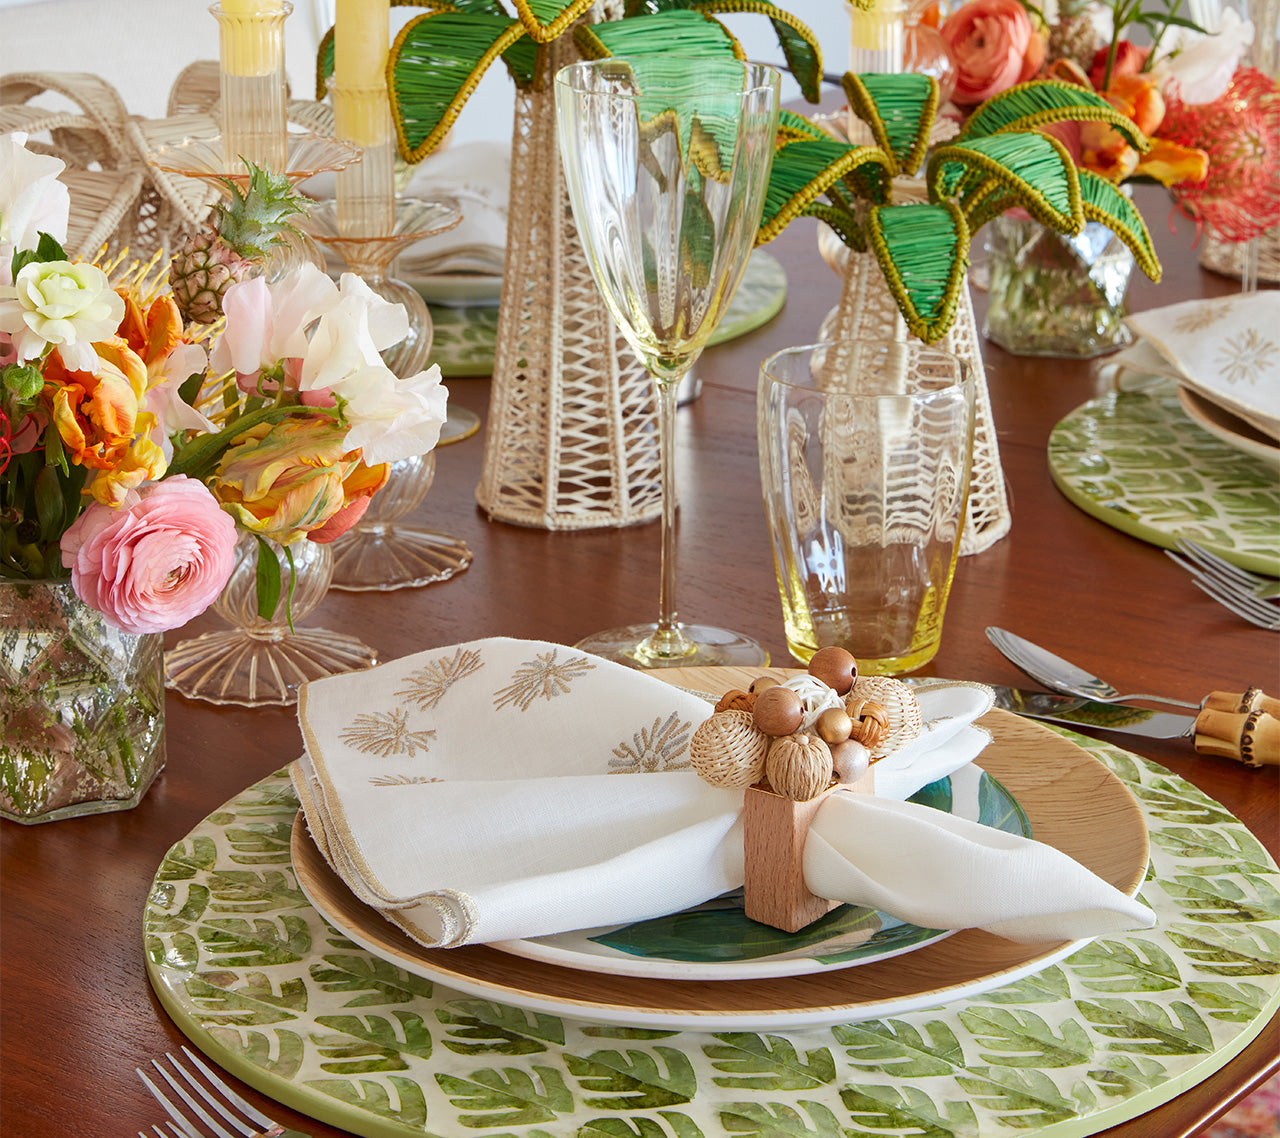 Table setting of a Fern Placemat in ivory & green with a natural wood napkin holder on a wood table